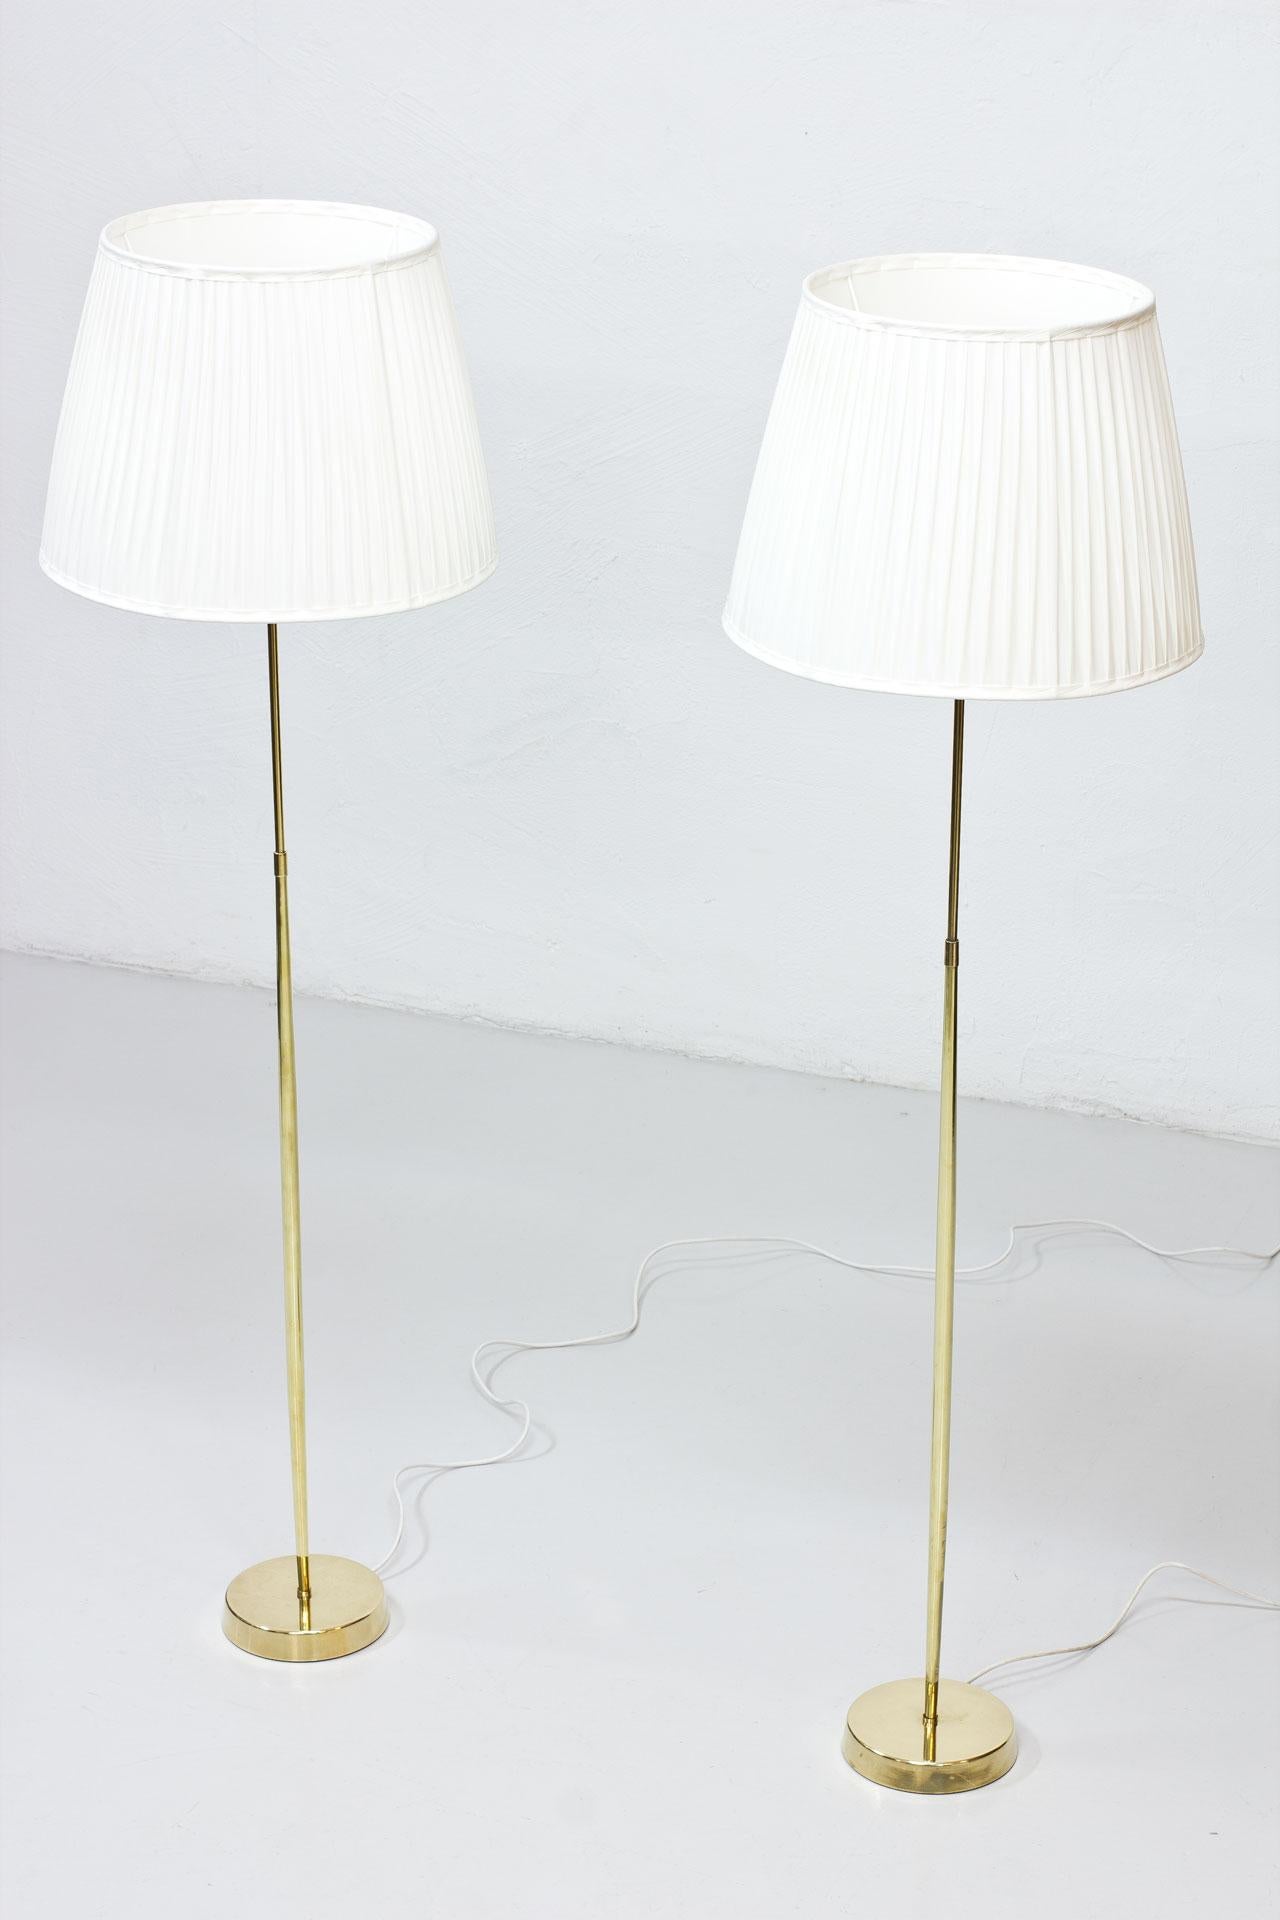 Swedish Pair of ASEA Belysning Brass Floor Lamps, 1950s, Hand-Pleated Chintz Shades For Sale